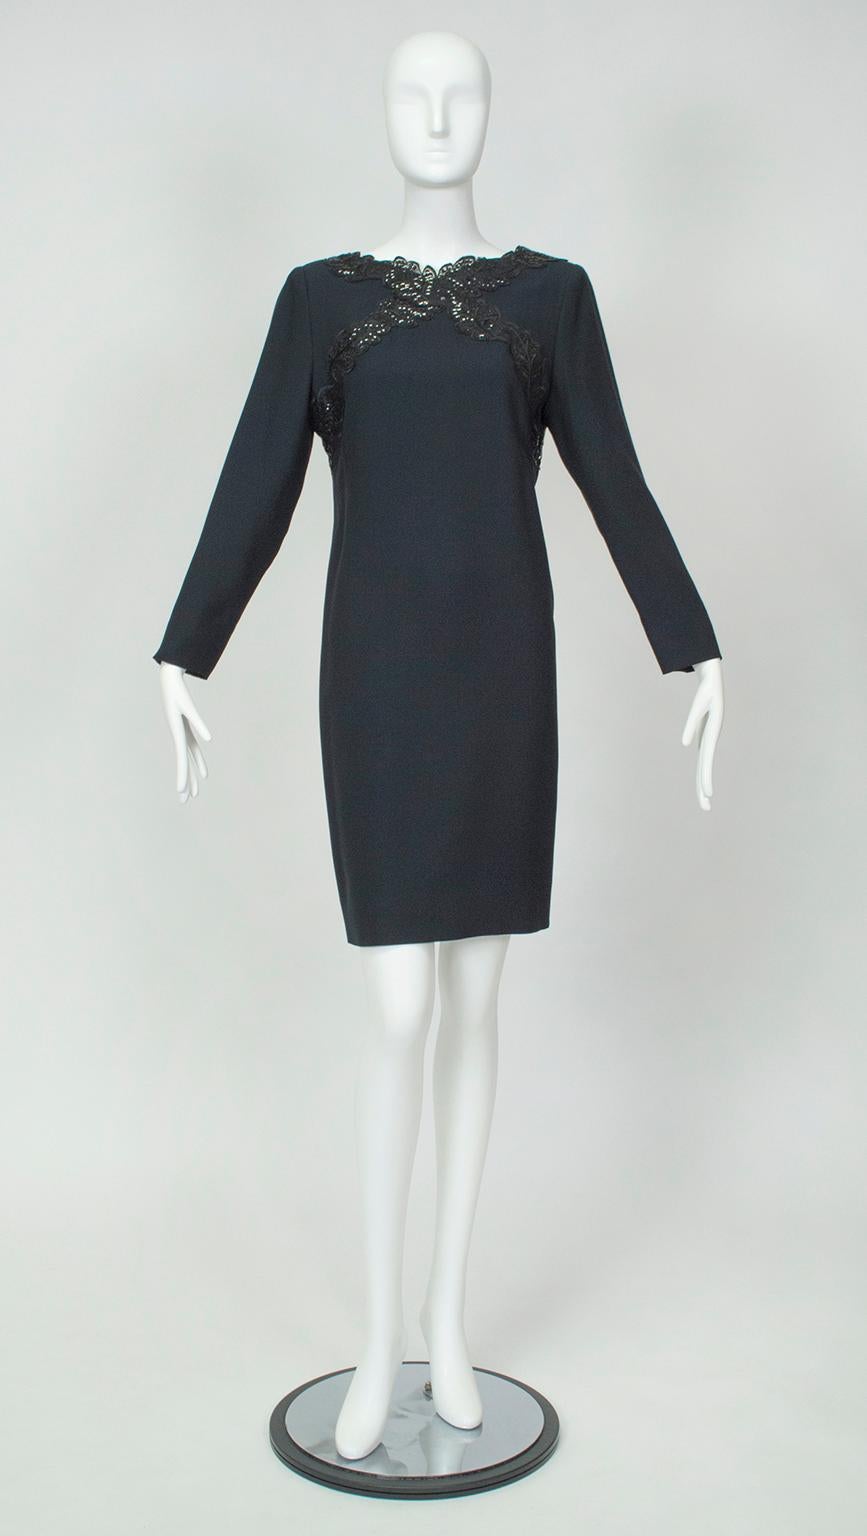 An elusive long sleeved cocktail dress for the lady who wishes to cover her arms but accentuate her legs. This abbreviated—almost mini—shift bridges the gap between covered and uncovered thanks to its short hemline, but balances the attention with